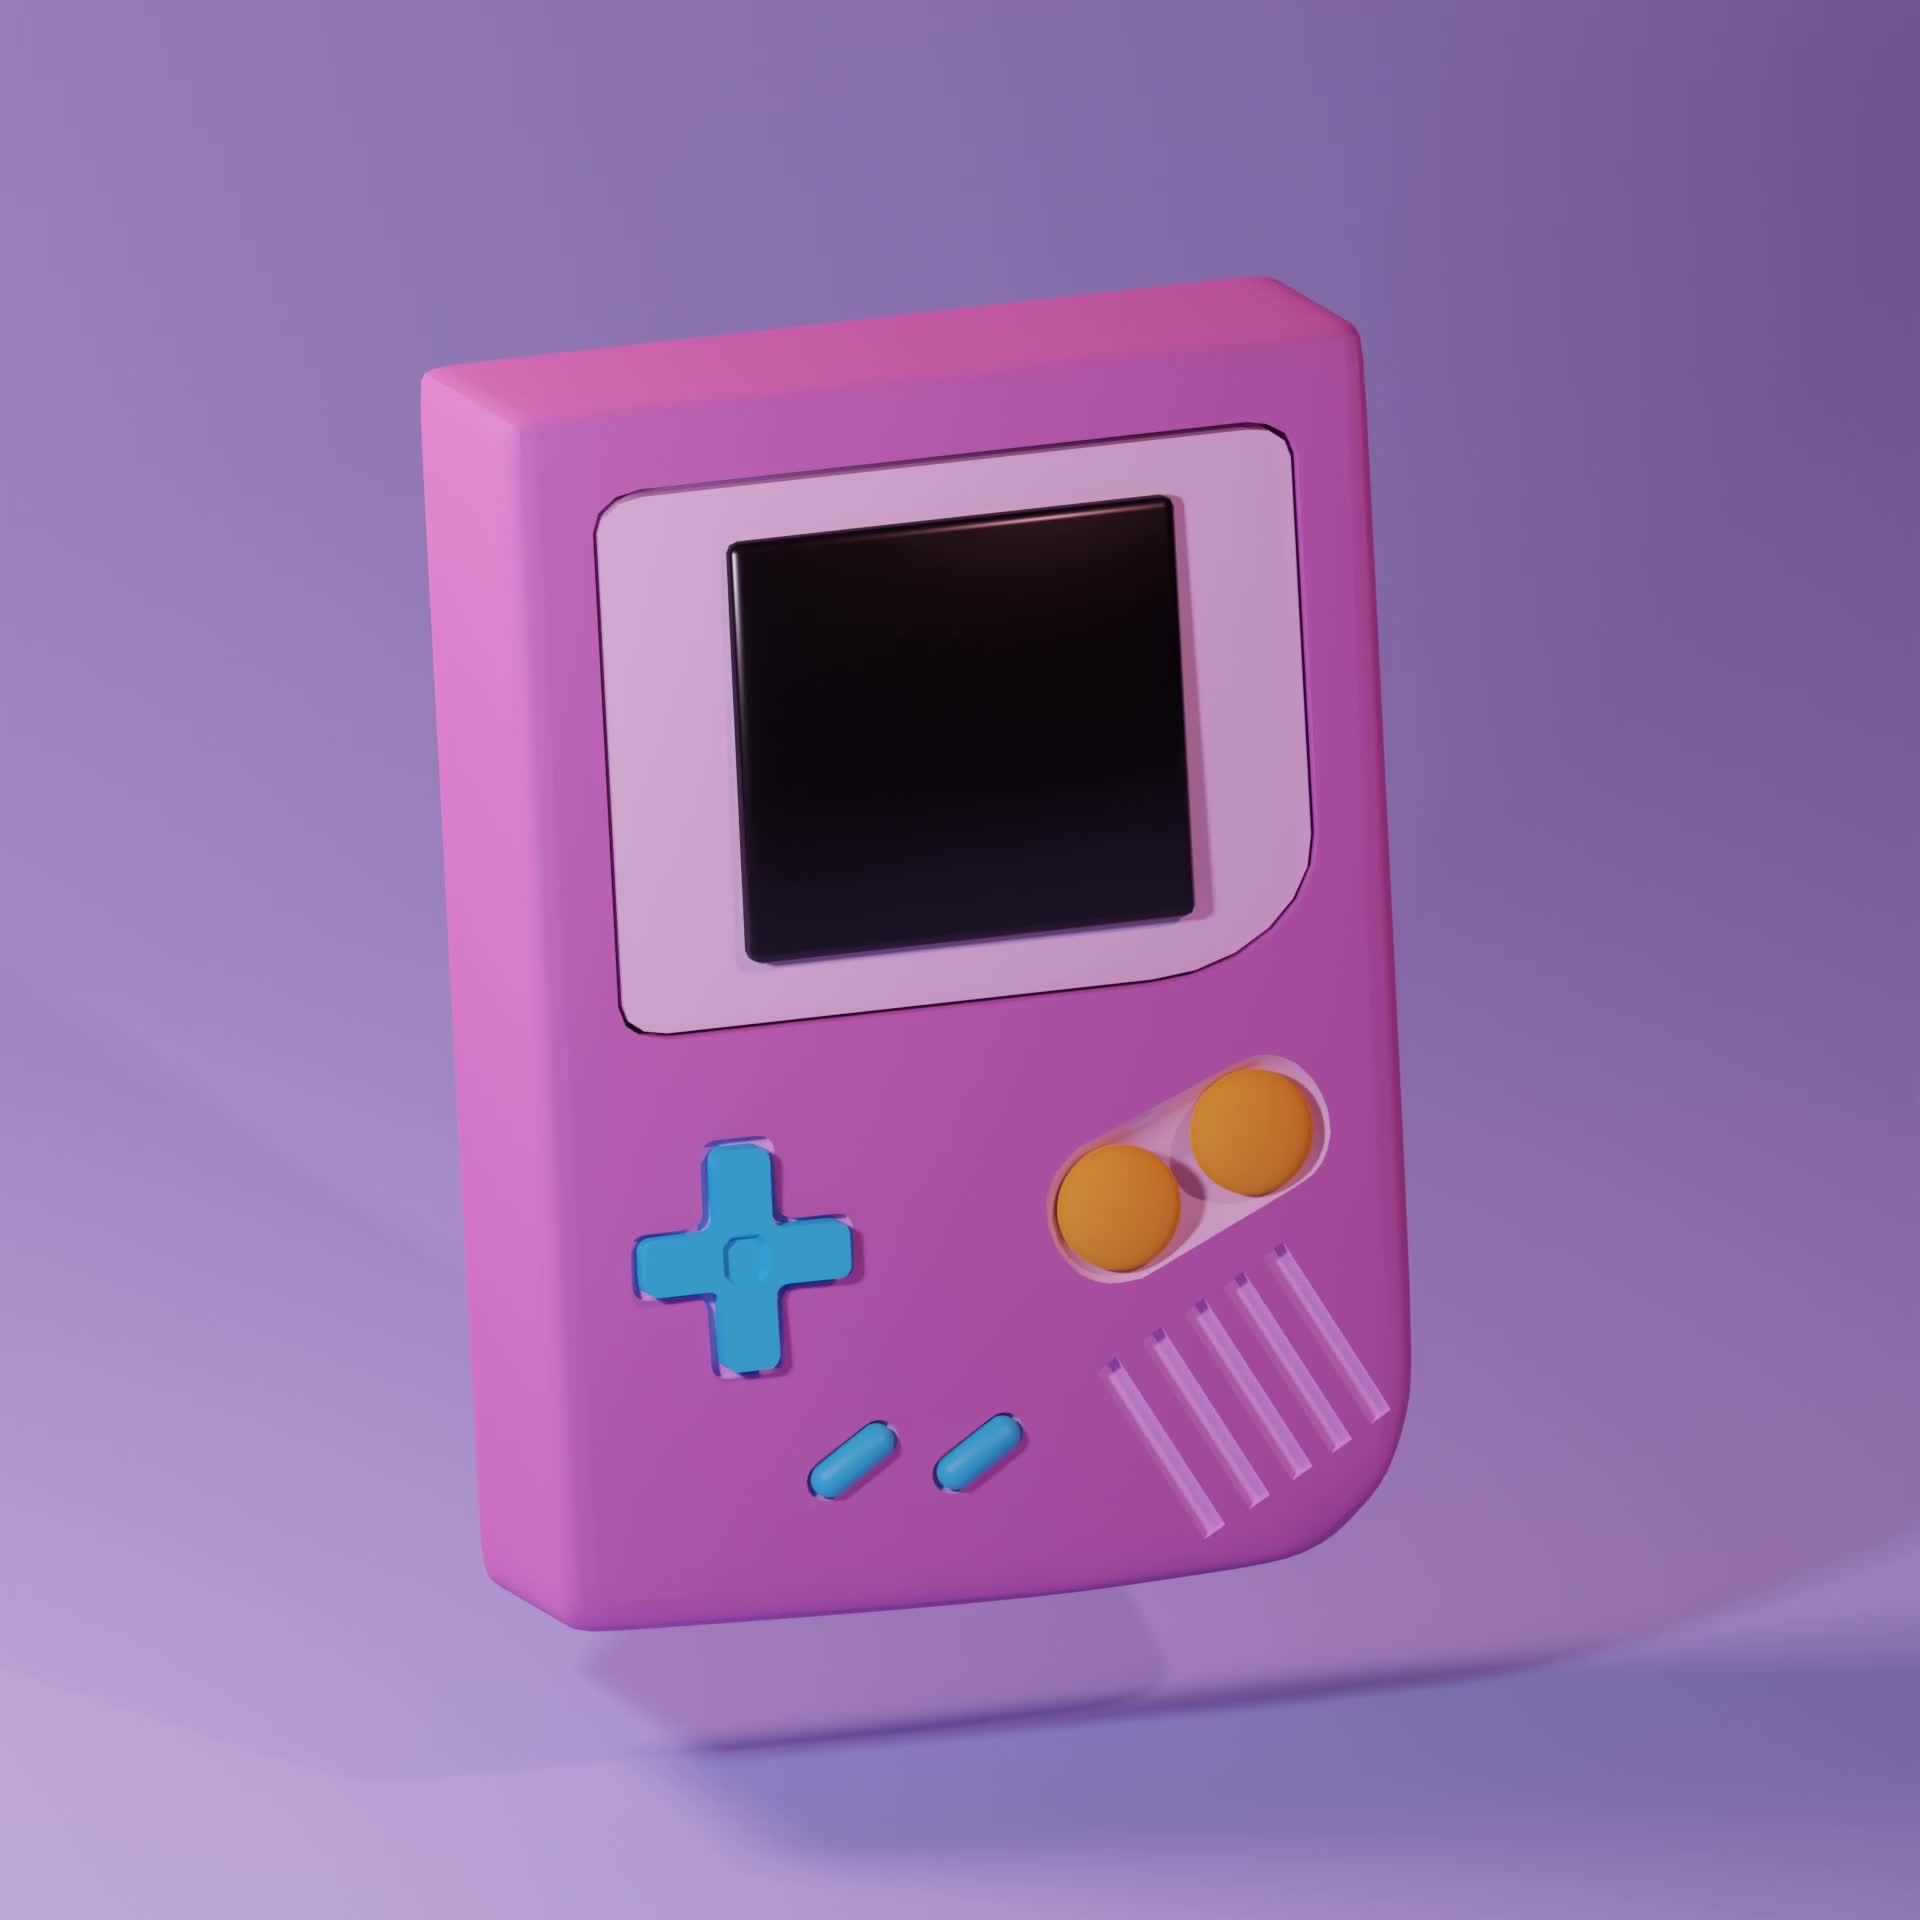 A pink Gameboy on a purple background - Game Boy